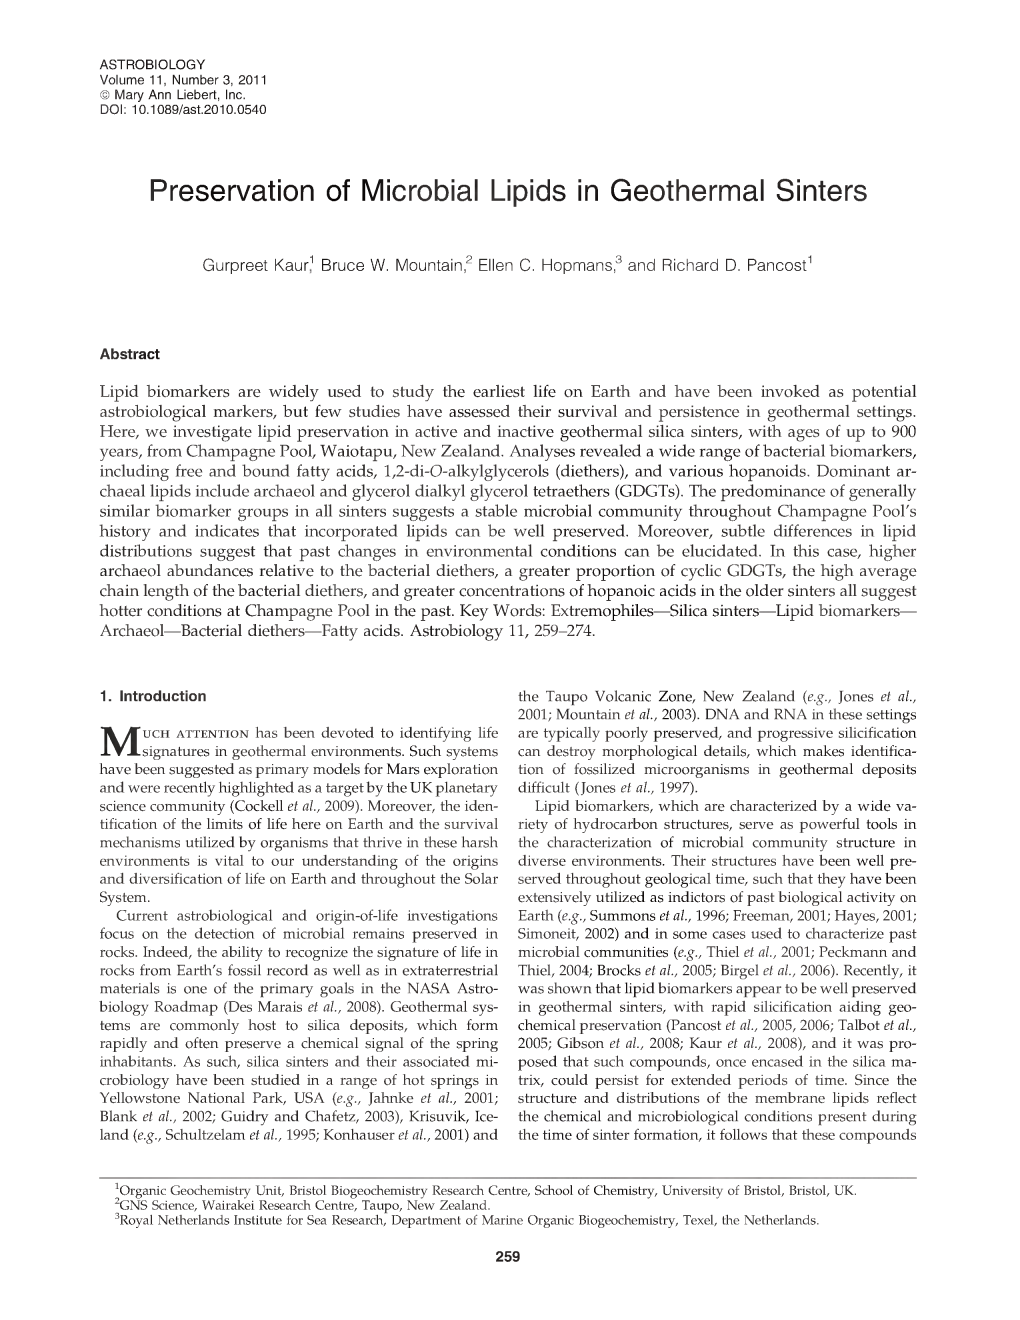 Preservation of Microbial Lipids in Geothermal Sinters